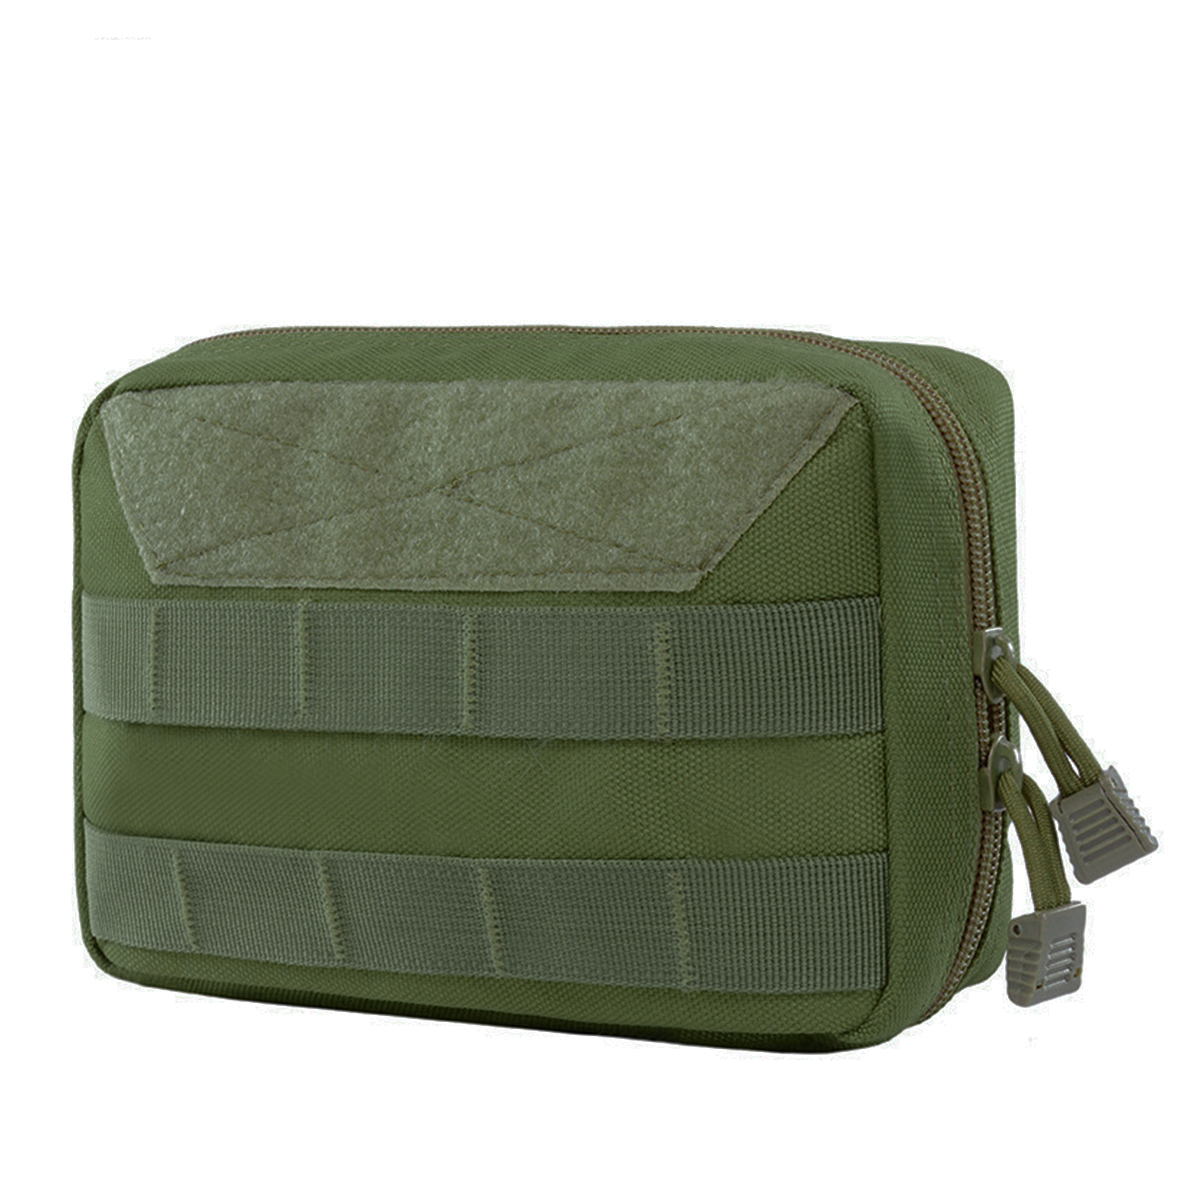 

Outdoor Multifunctional MOLLE Sports Fanny Pack Travel First Aid Medical Kit Tactical Gear Fanny Pack Plug-in Module Pac